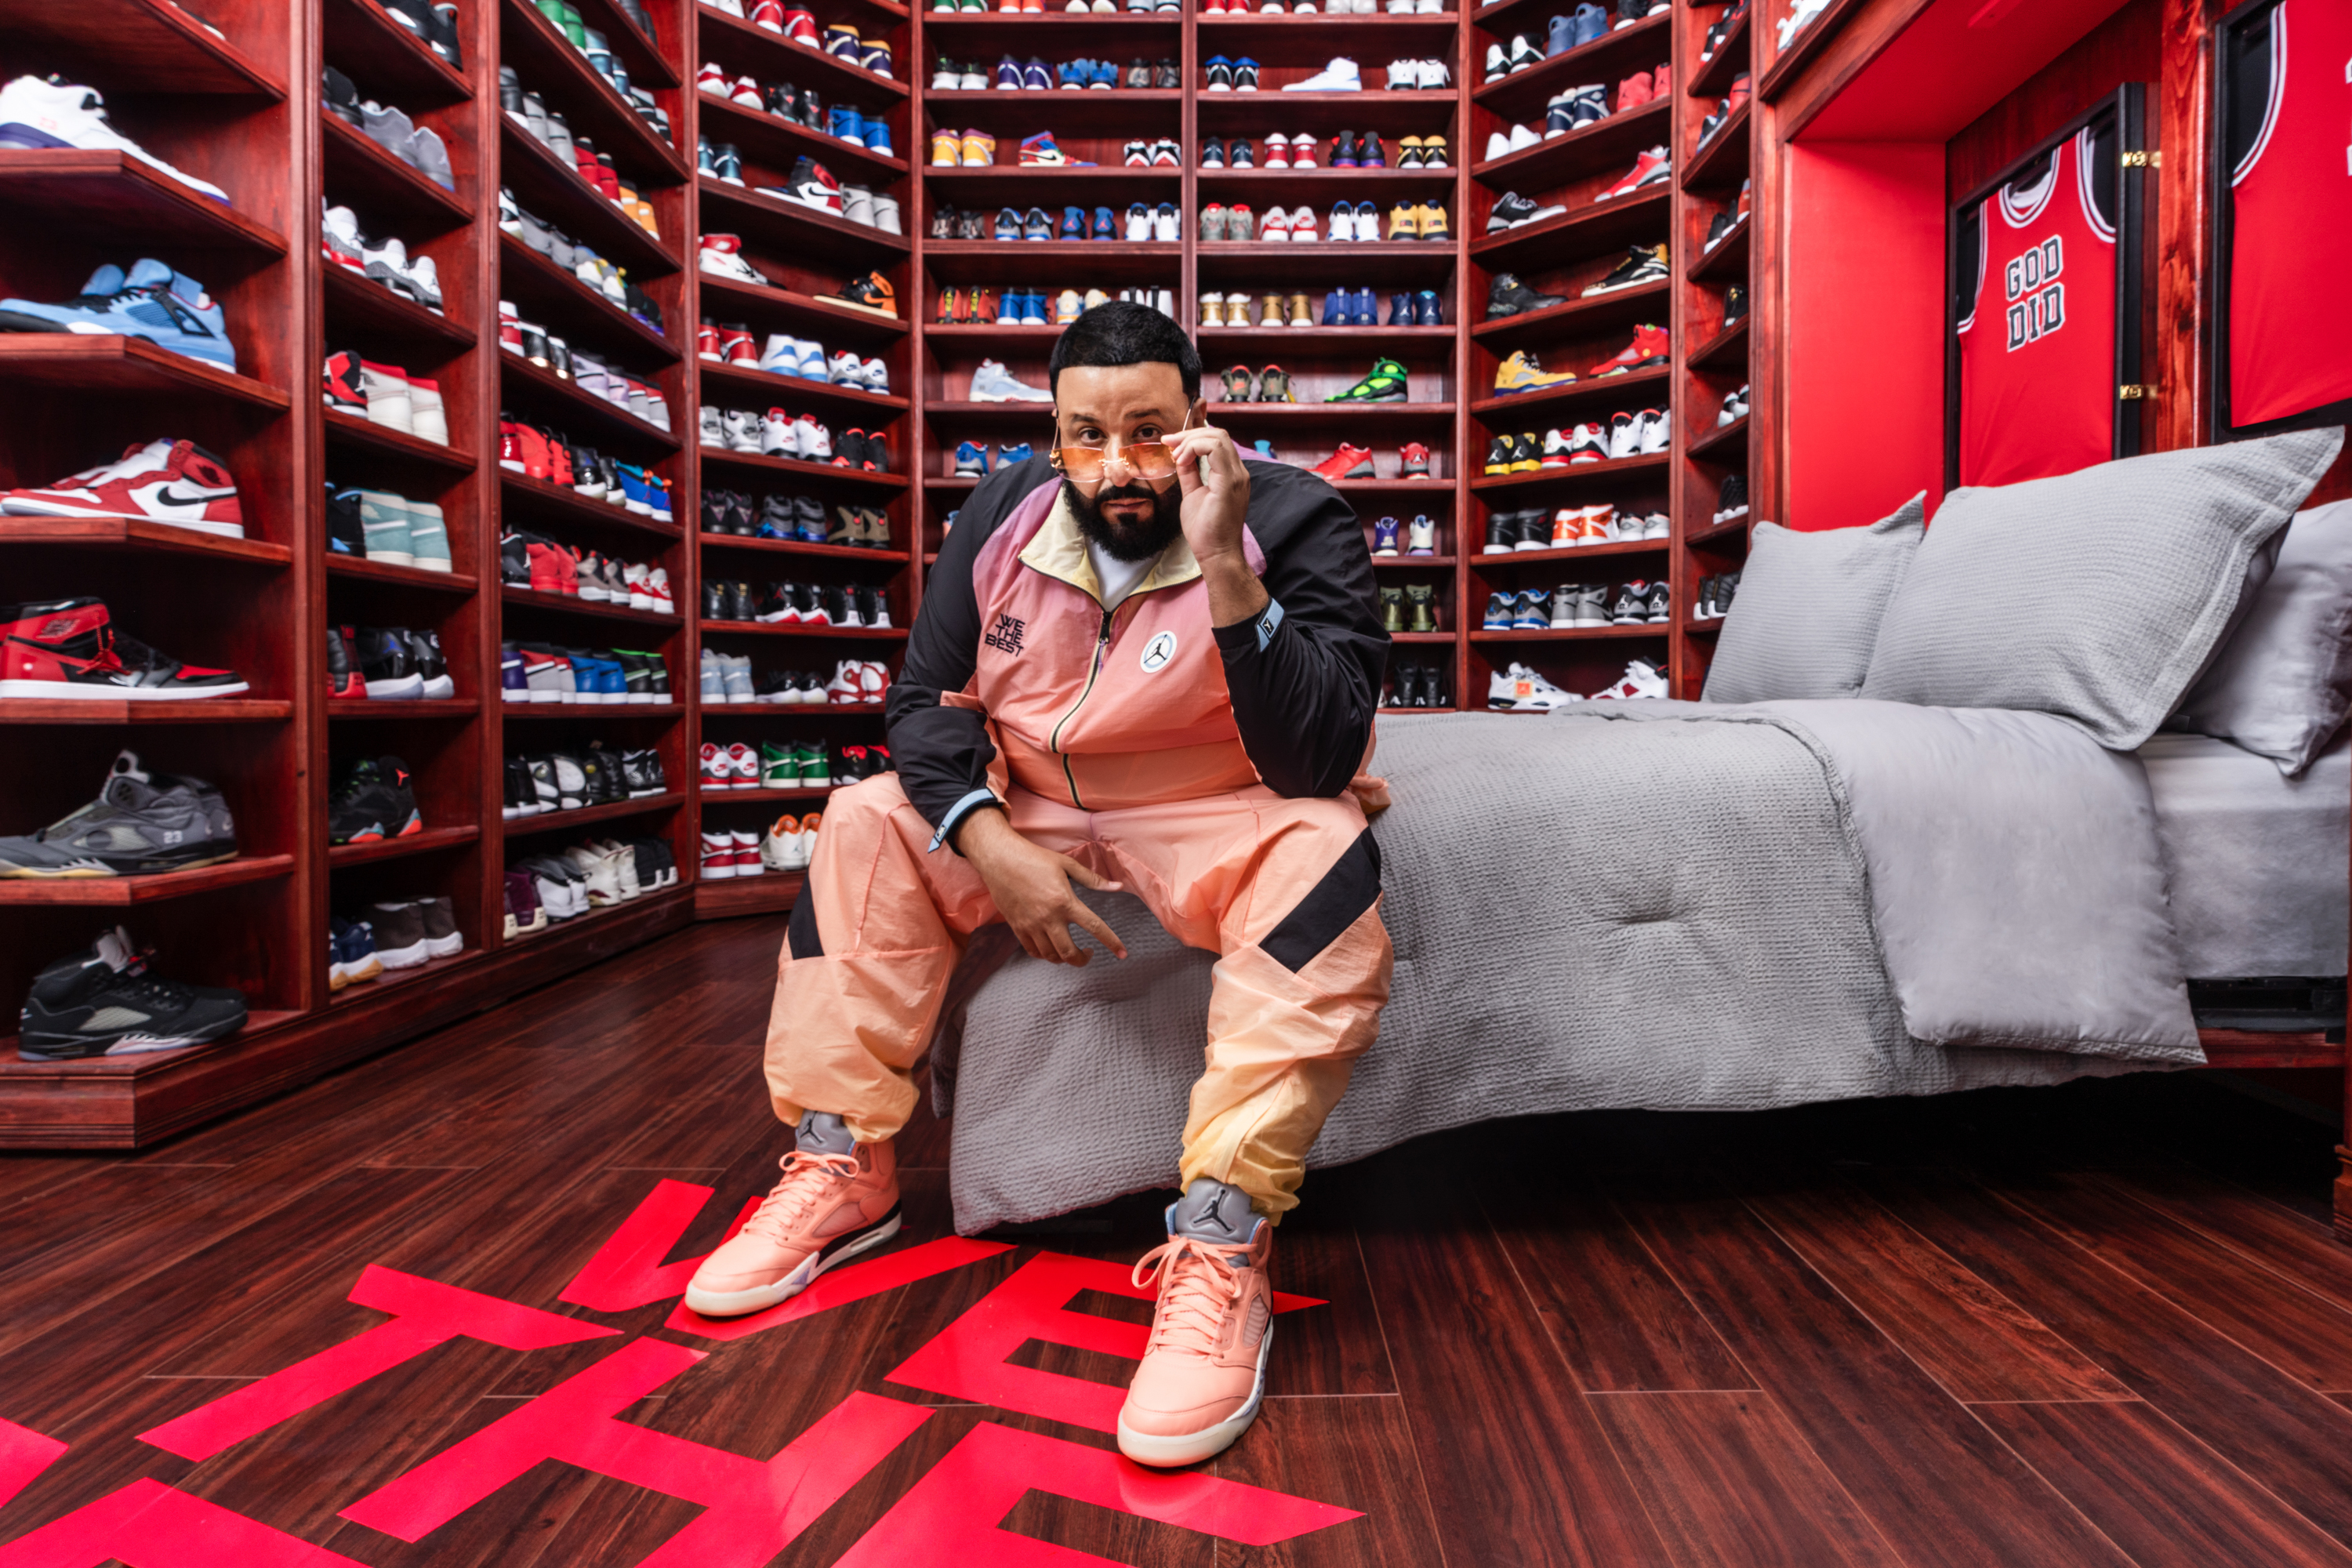 Sleep In DJ Khaled's Sneaker Closet For Rs 900 Per Night On Airbnb